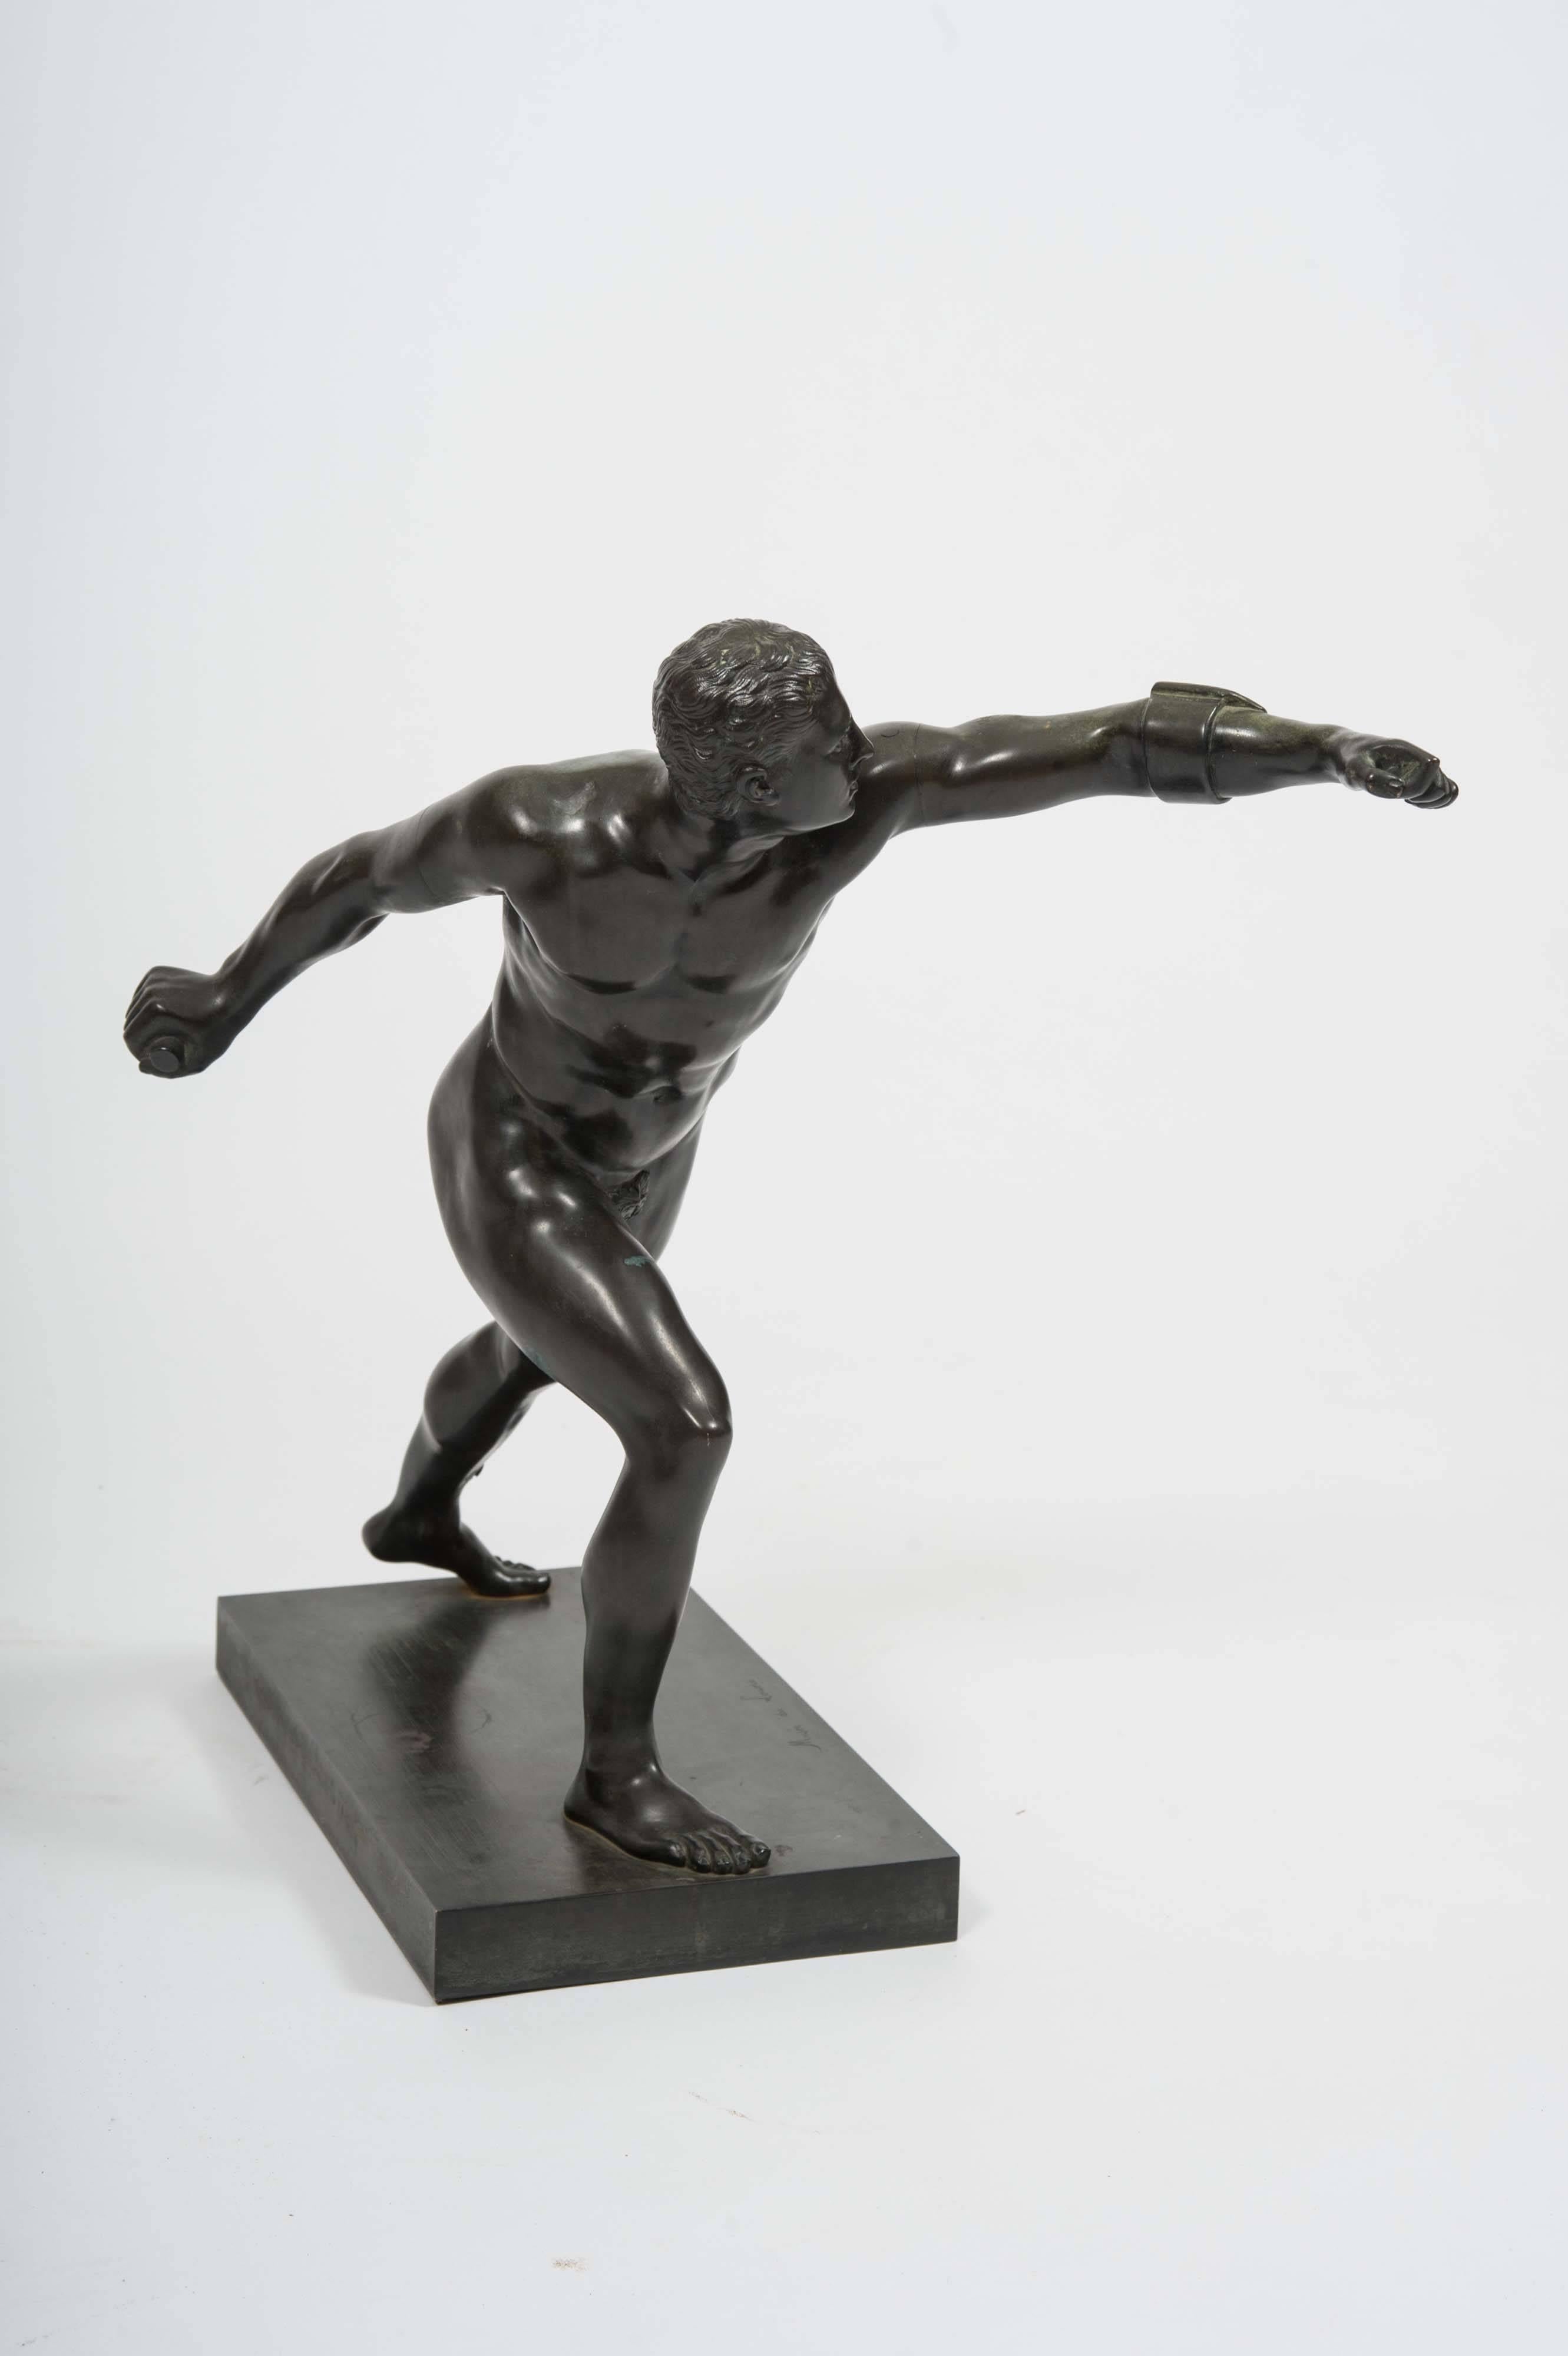 This handsome and well-proportioned French bronze depicts a Greek male nude in a fighting pose. It is a reproduction of the original sculpture that resides in the Louvre Museum in France, titled The Borghese Gladiator - originally part of the